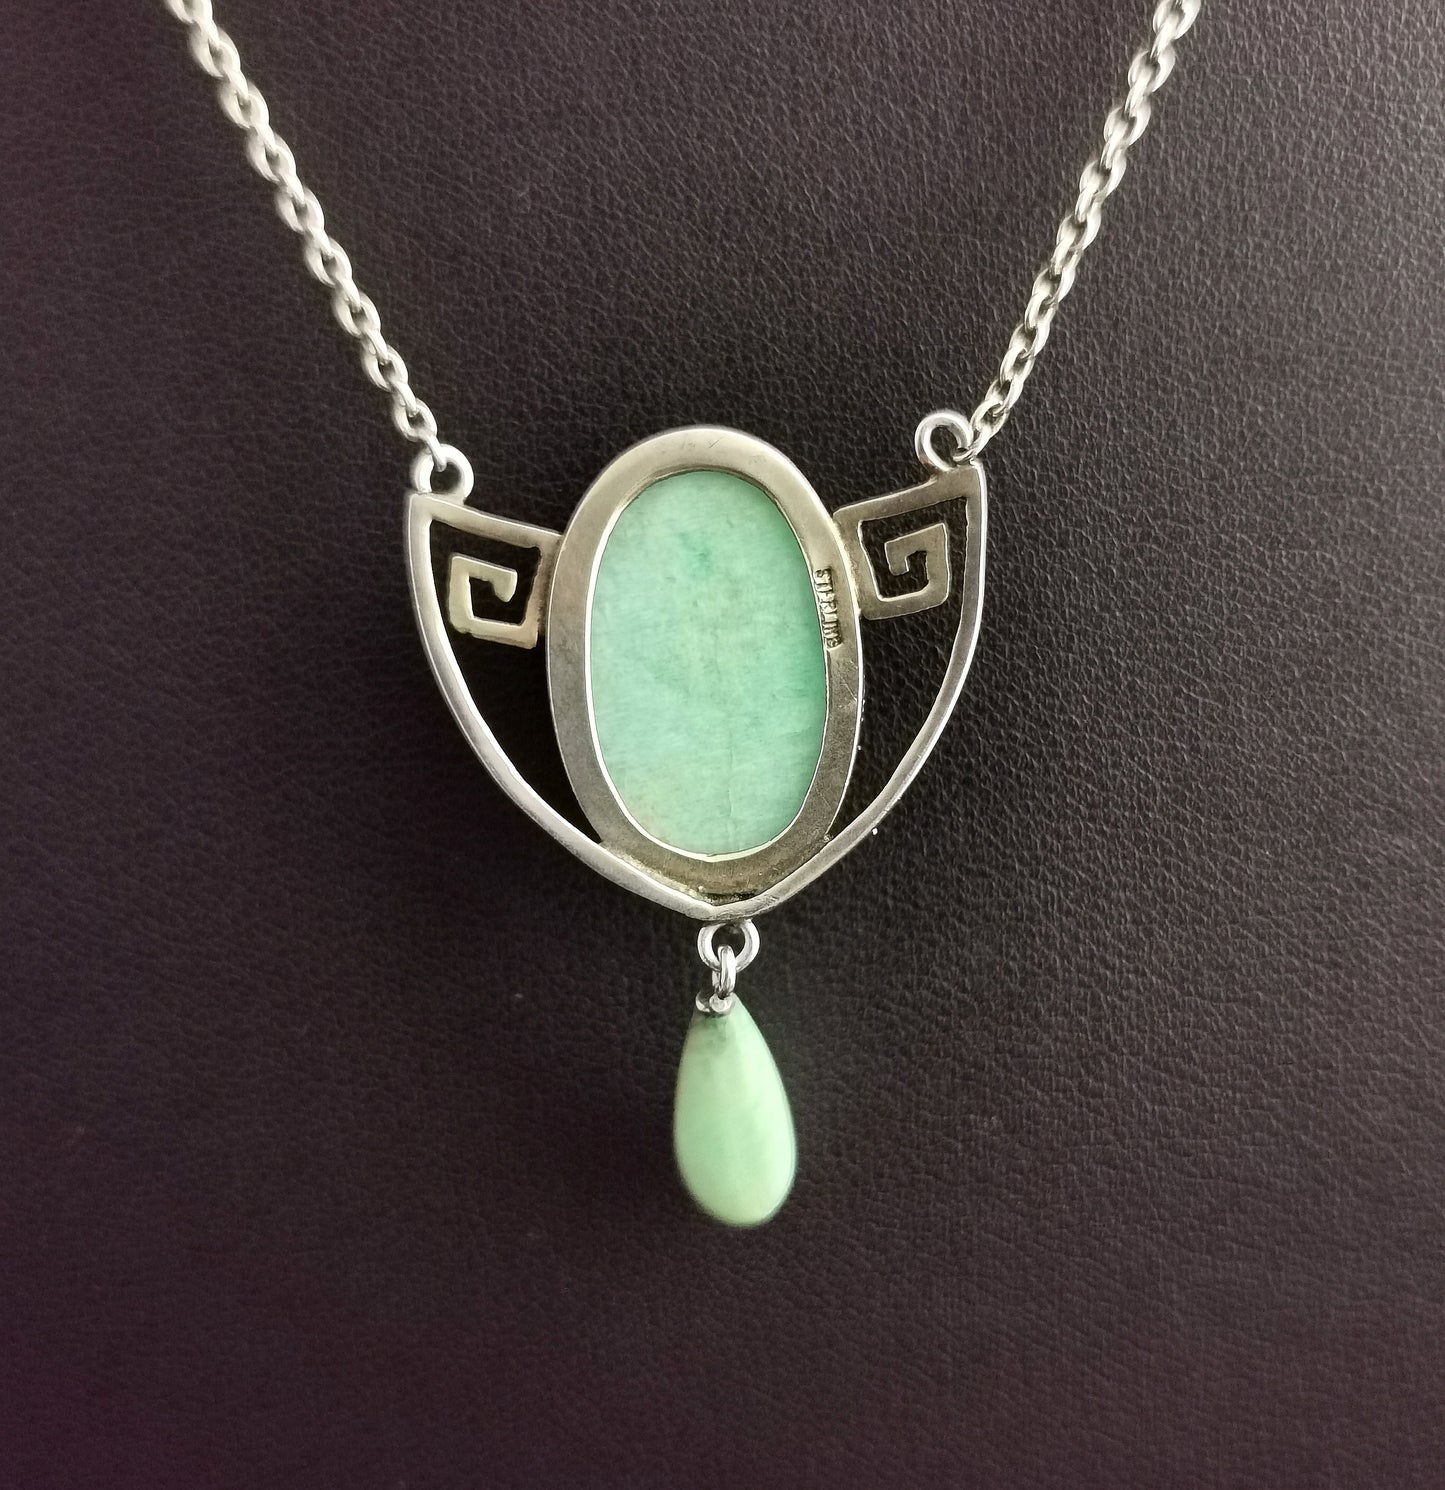 Arts and crafts scarab beetle necklace, Sterling silver and Amazonite